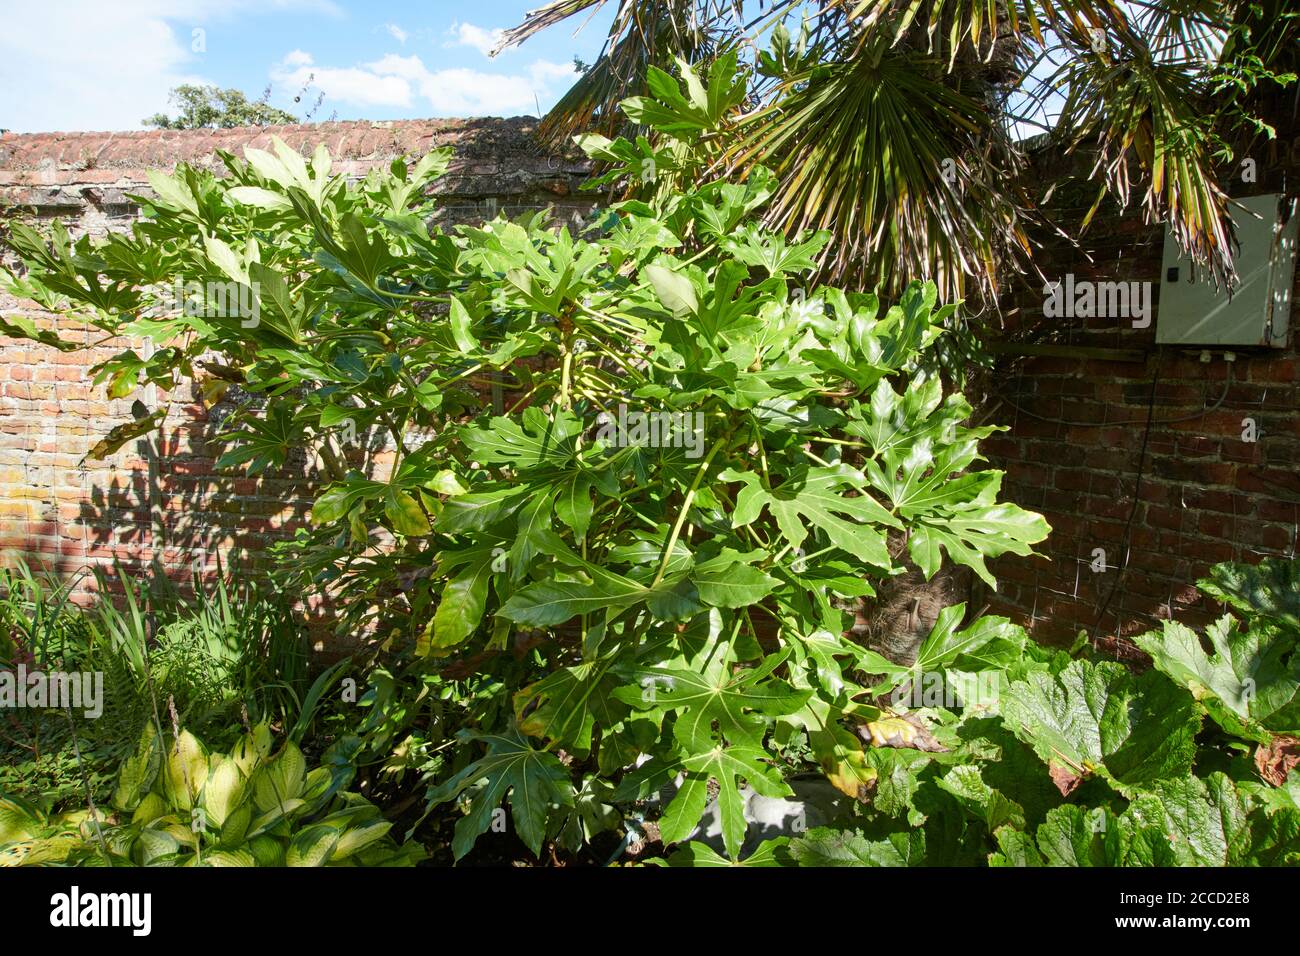 Fatsia japonica or Castor oil plant growing in a sunny spot ina walled garden, England, UK, GB. Stock Photo